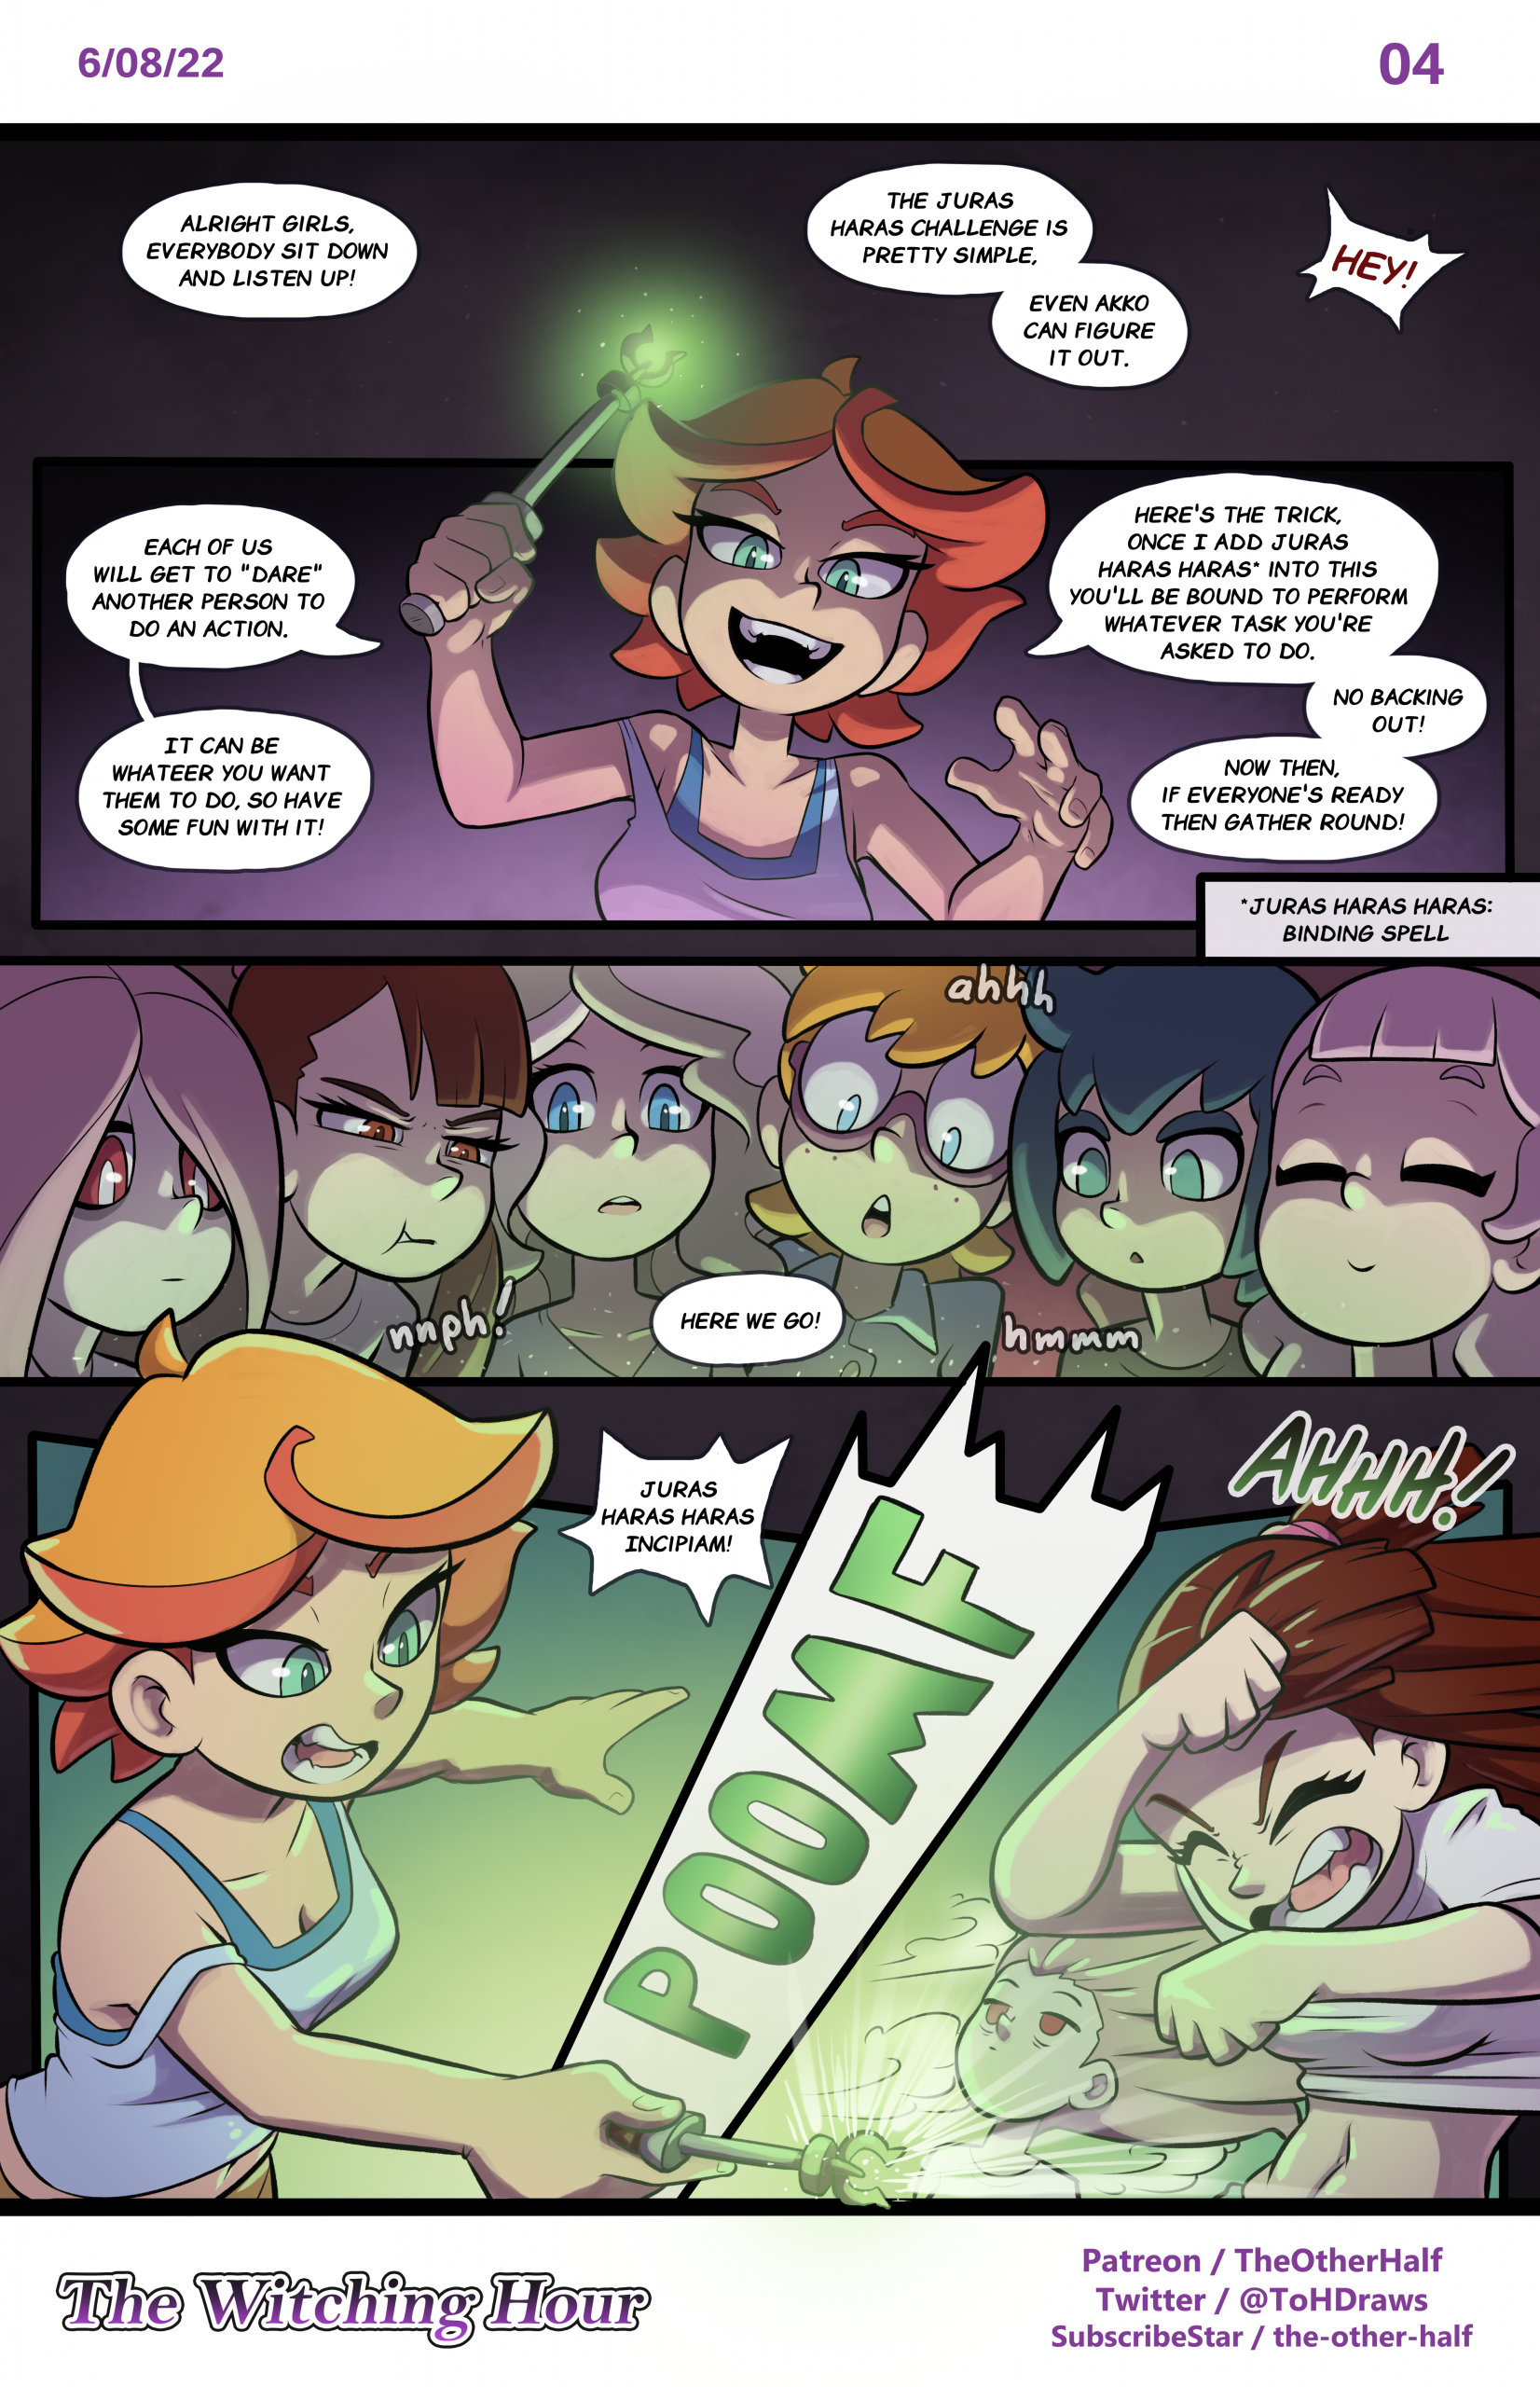 The Witching Hour - Little Witch Academia porn comic picture 4